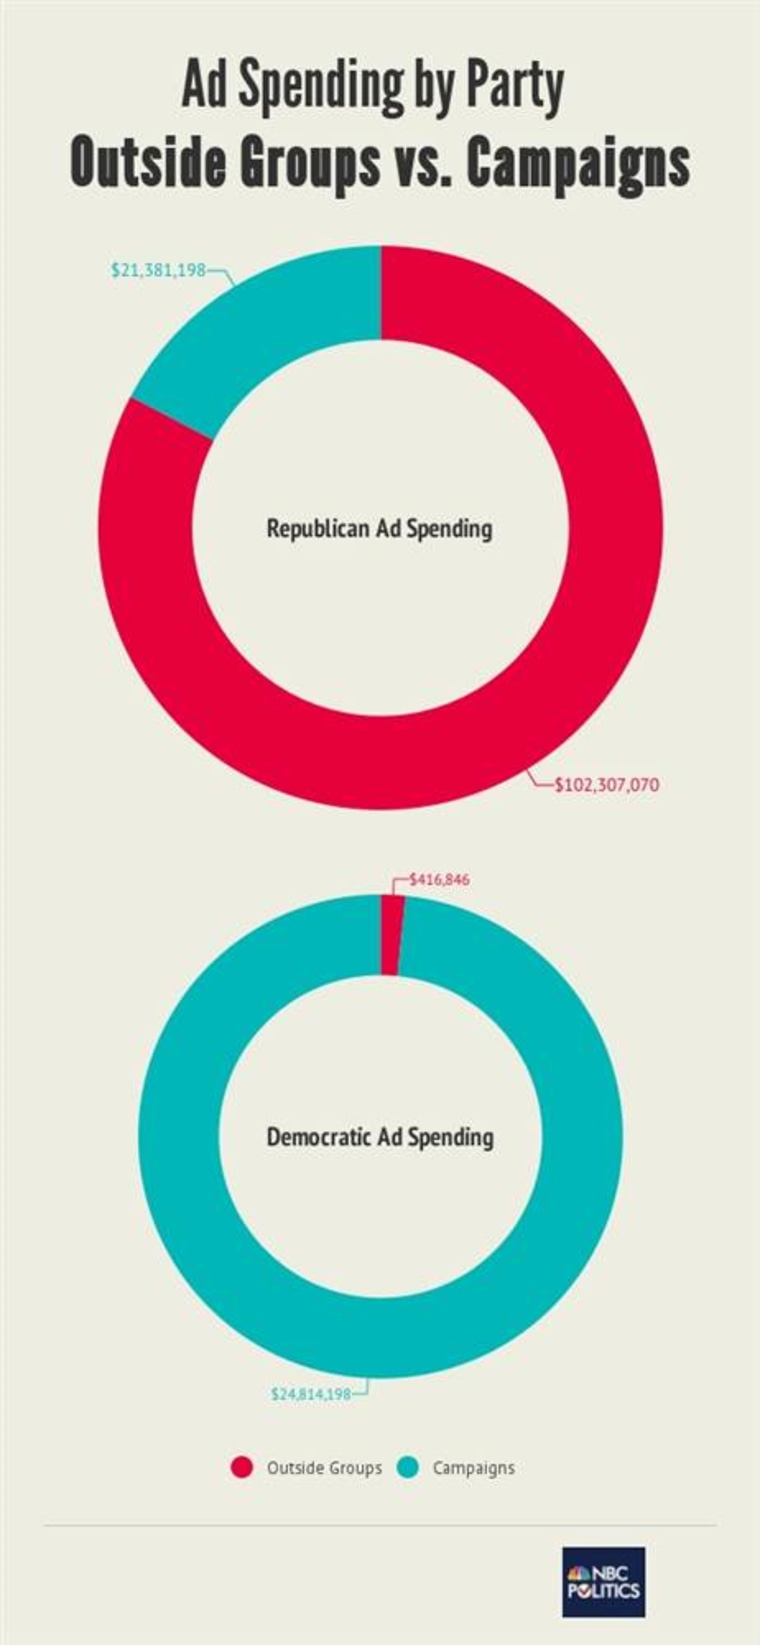 Ad Spending by Party: Outside Groups vs. Campaigns (NBC News)